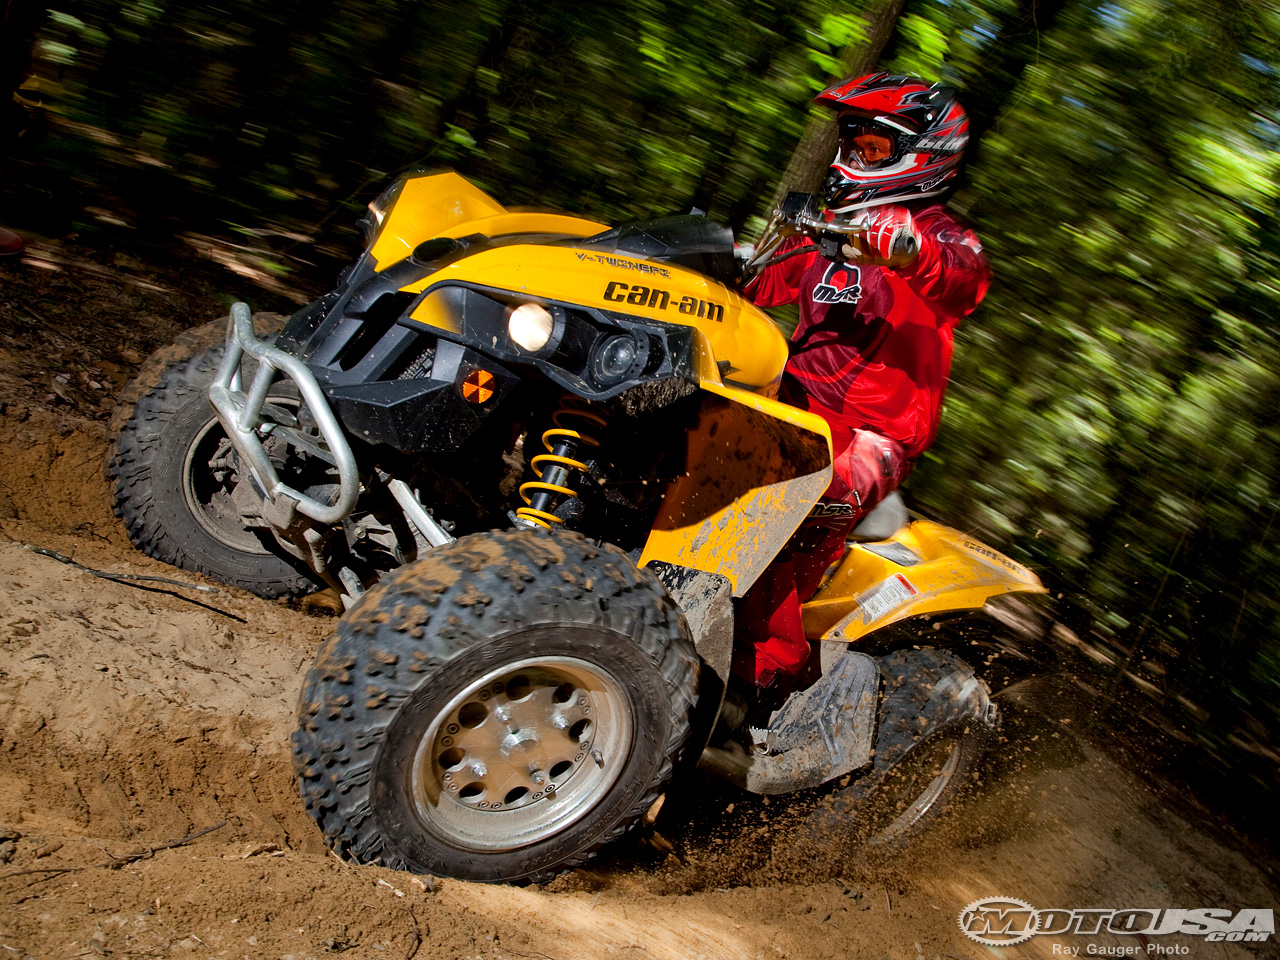 can-am renegade 800r-pic. 2